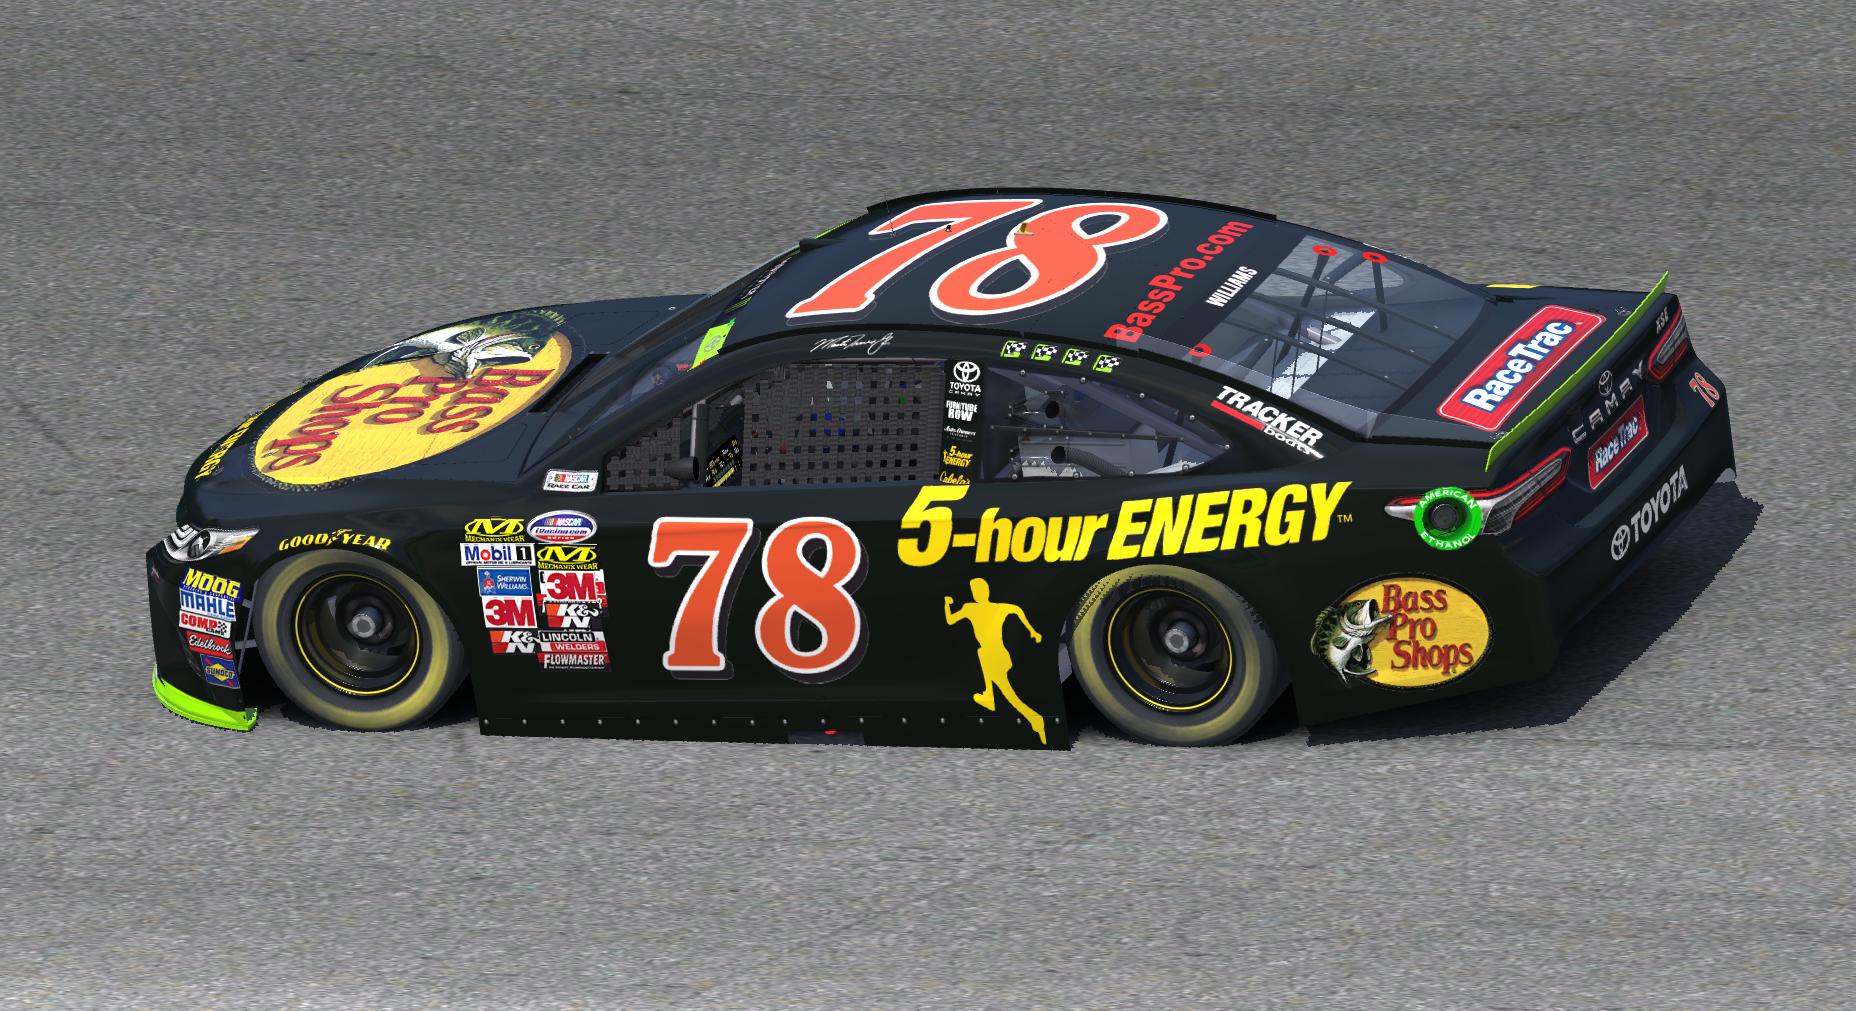 Preview of Martin Truex Jr. Final Furniture Row Racing Toyota by Justin M. Williams